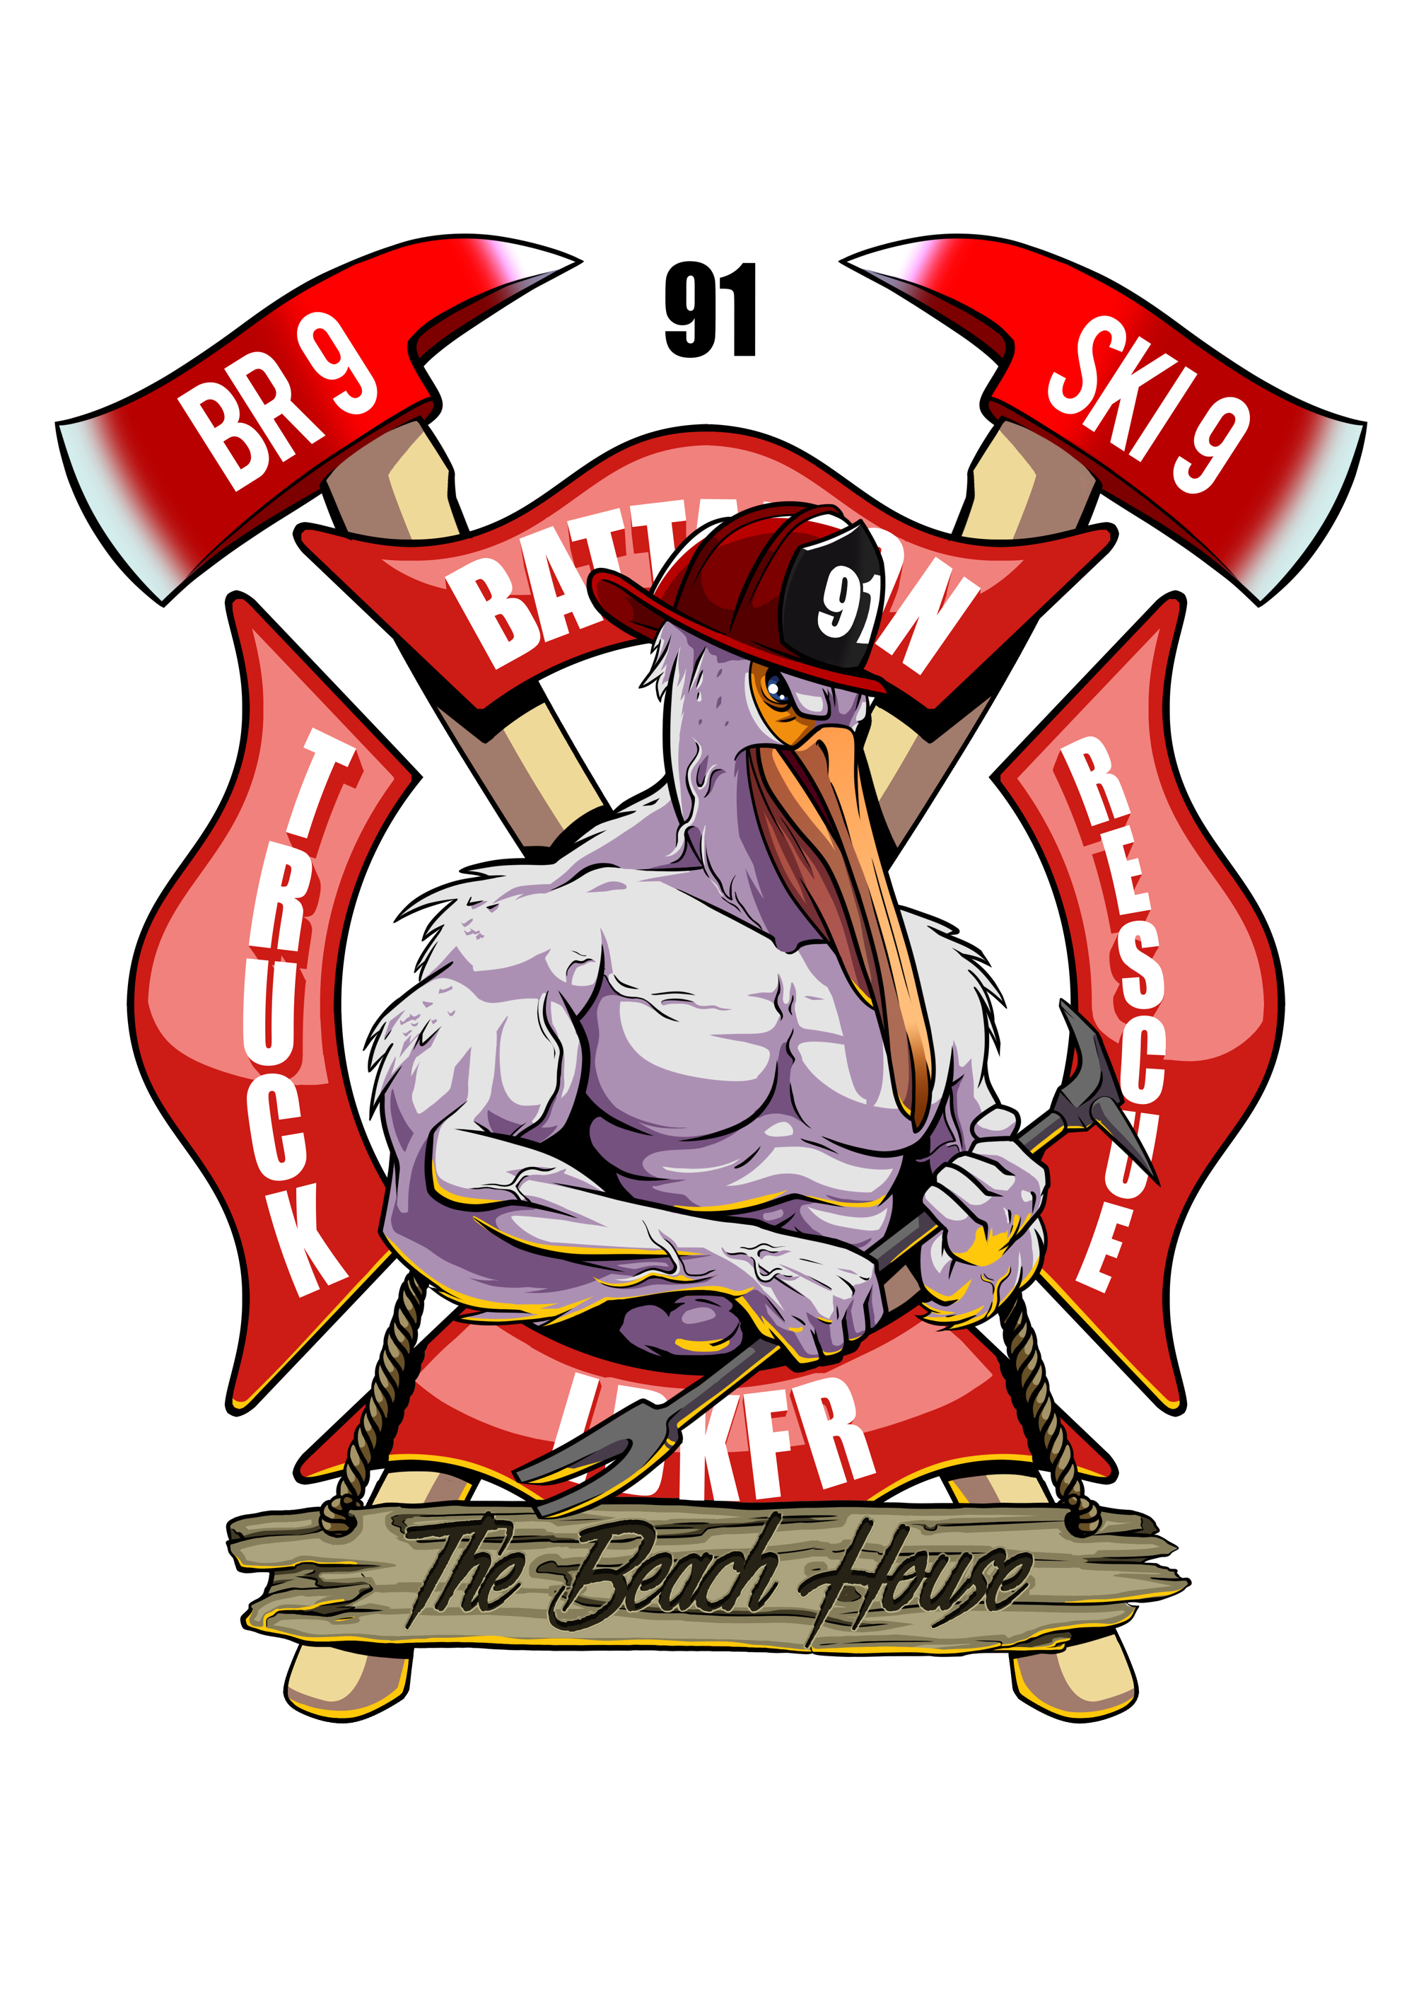 Station 91 considered using a swan, but ultimately used a pelican to represent the wildlife on the Key.Courtesy photo